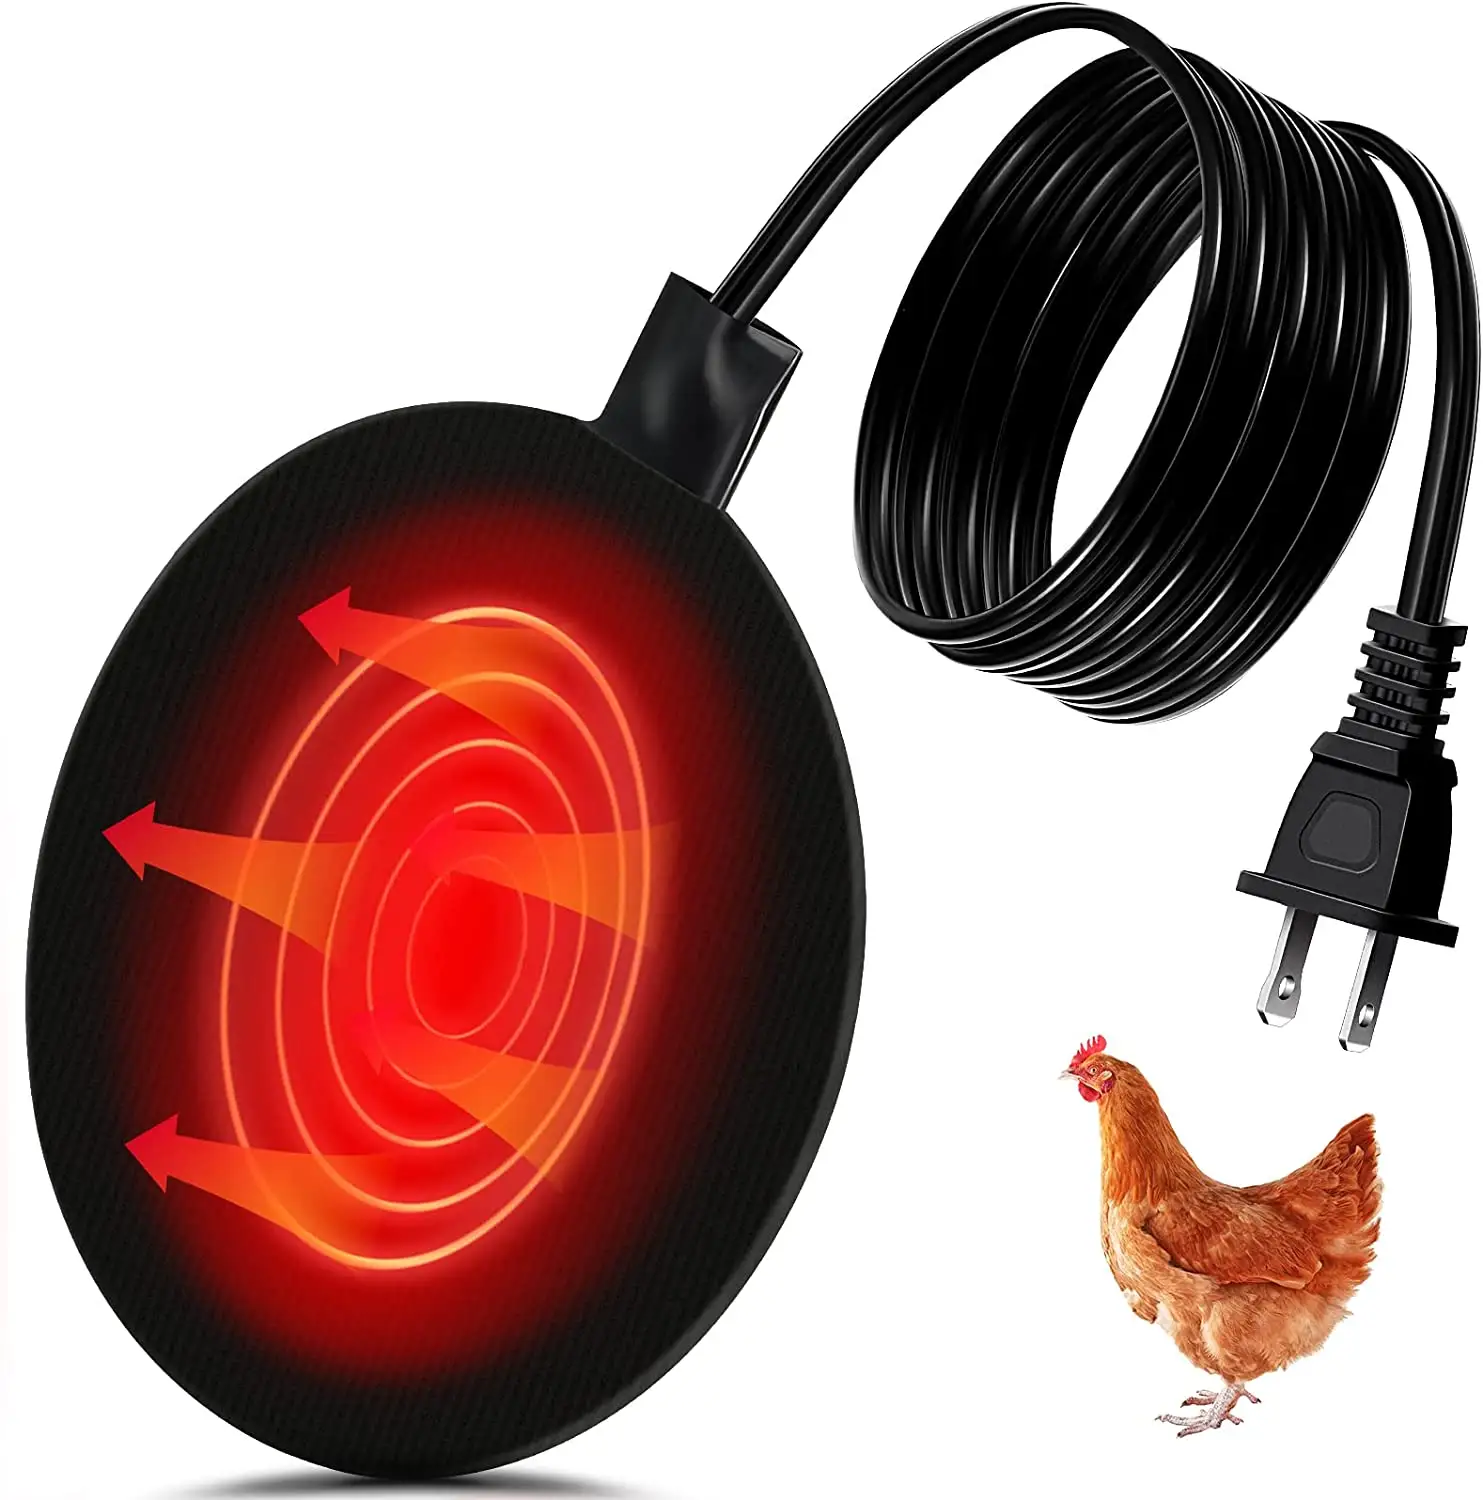 Chicken Water Heater, Poultry Water Heater Base 120v 35w Silicone Heated Pad Chicken Waterer Heated Chicken Coop Heater